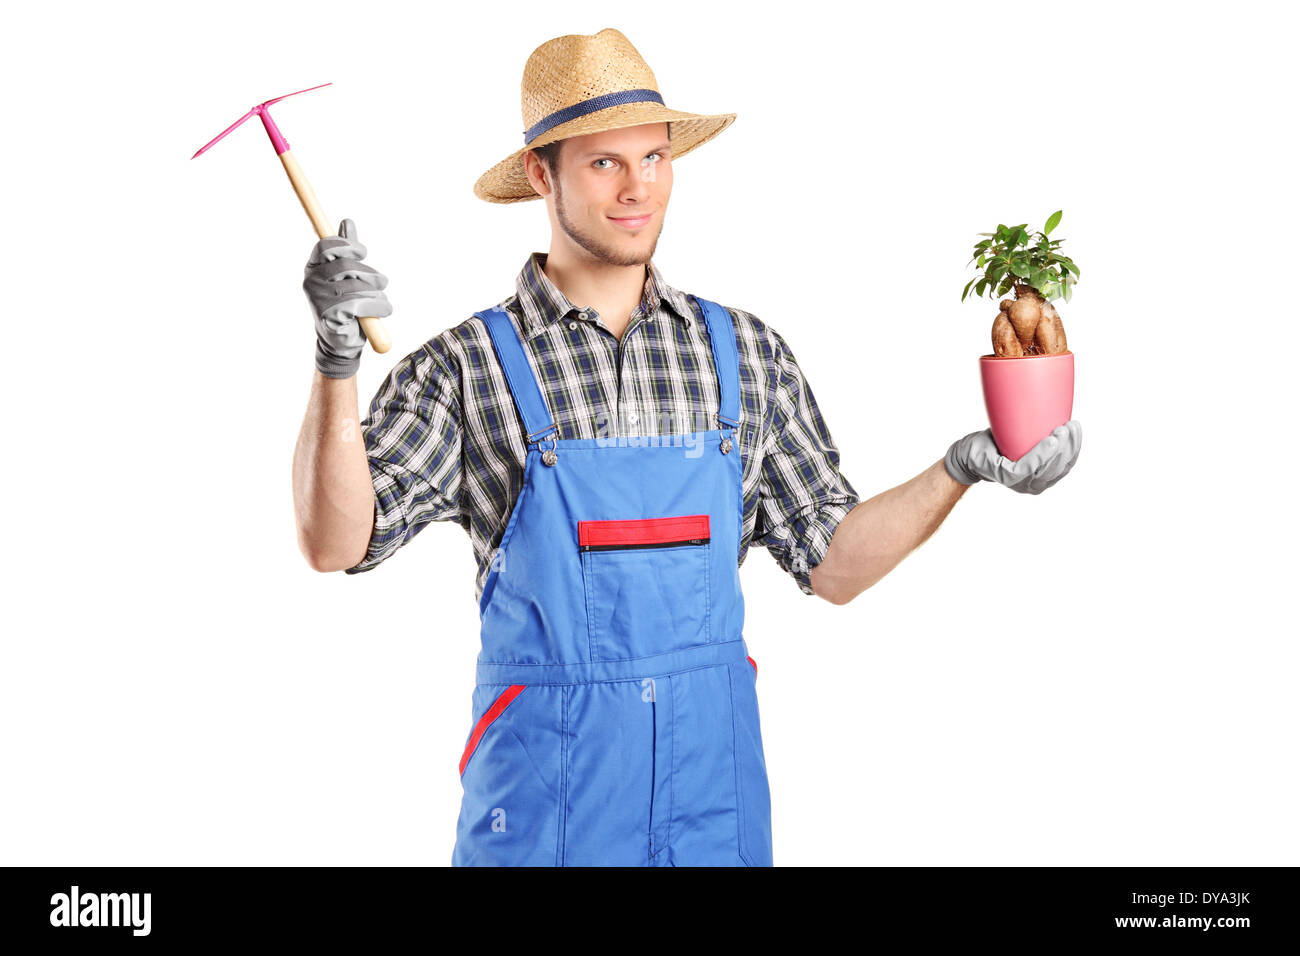 Male gardener holding a plant Stock Photo